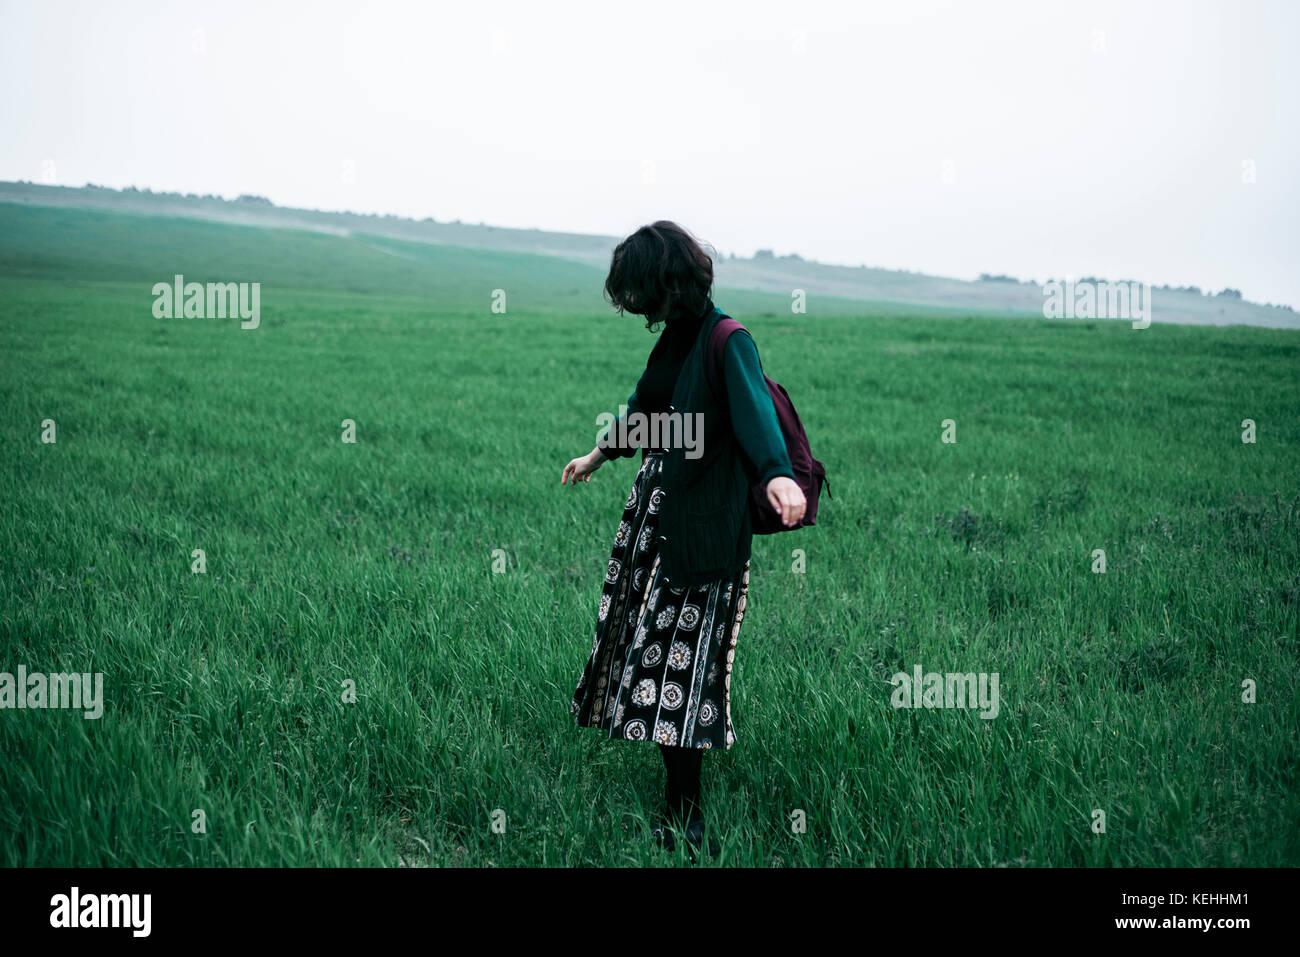 Caucasian woman standing in field of grass Stock Photo